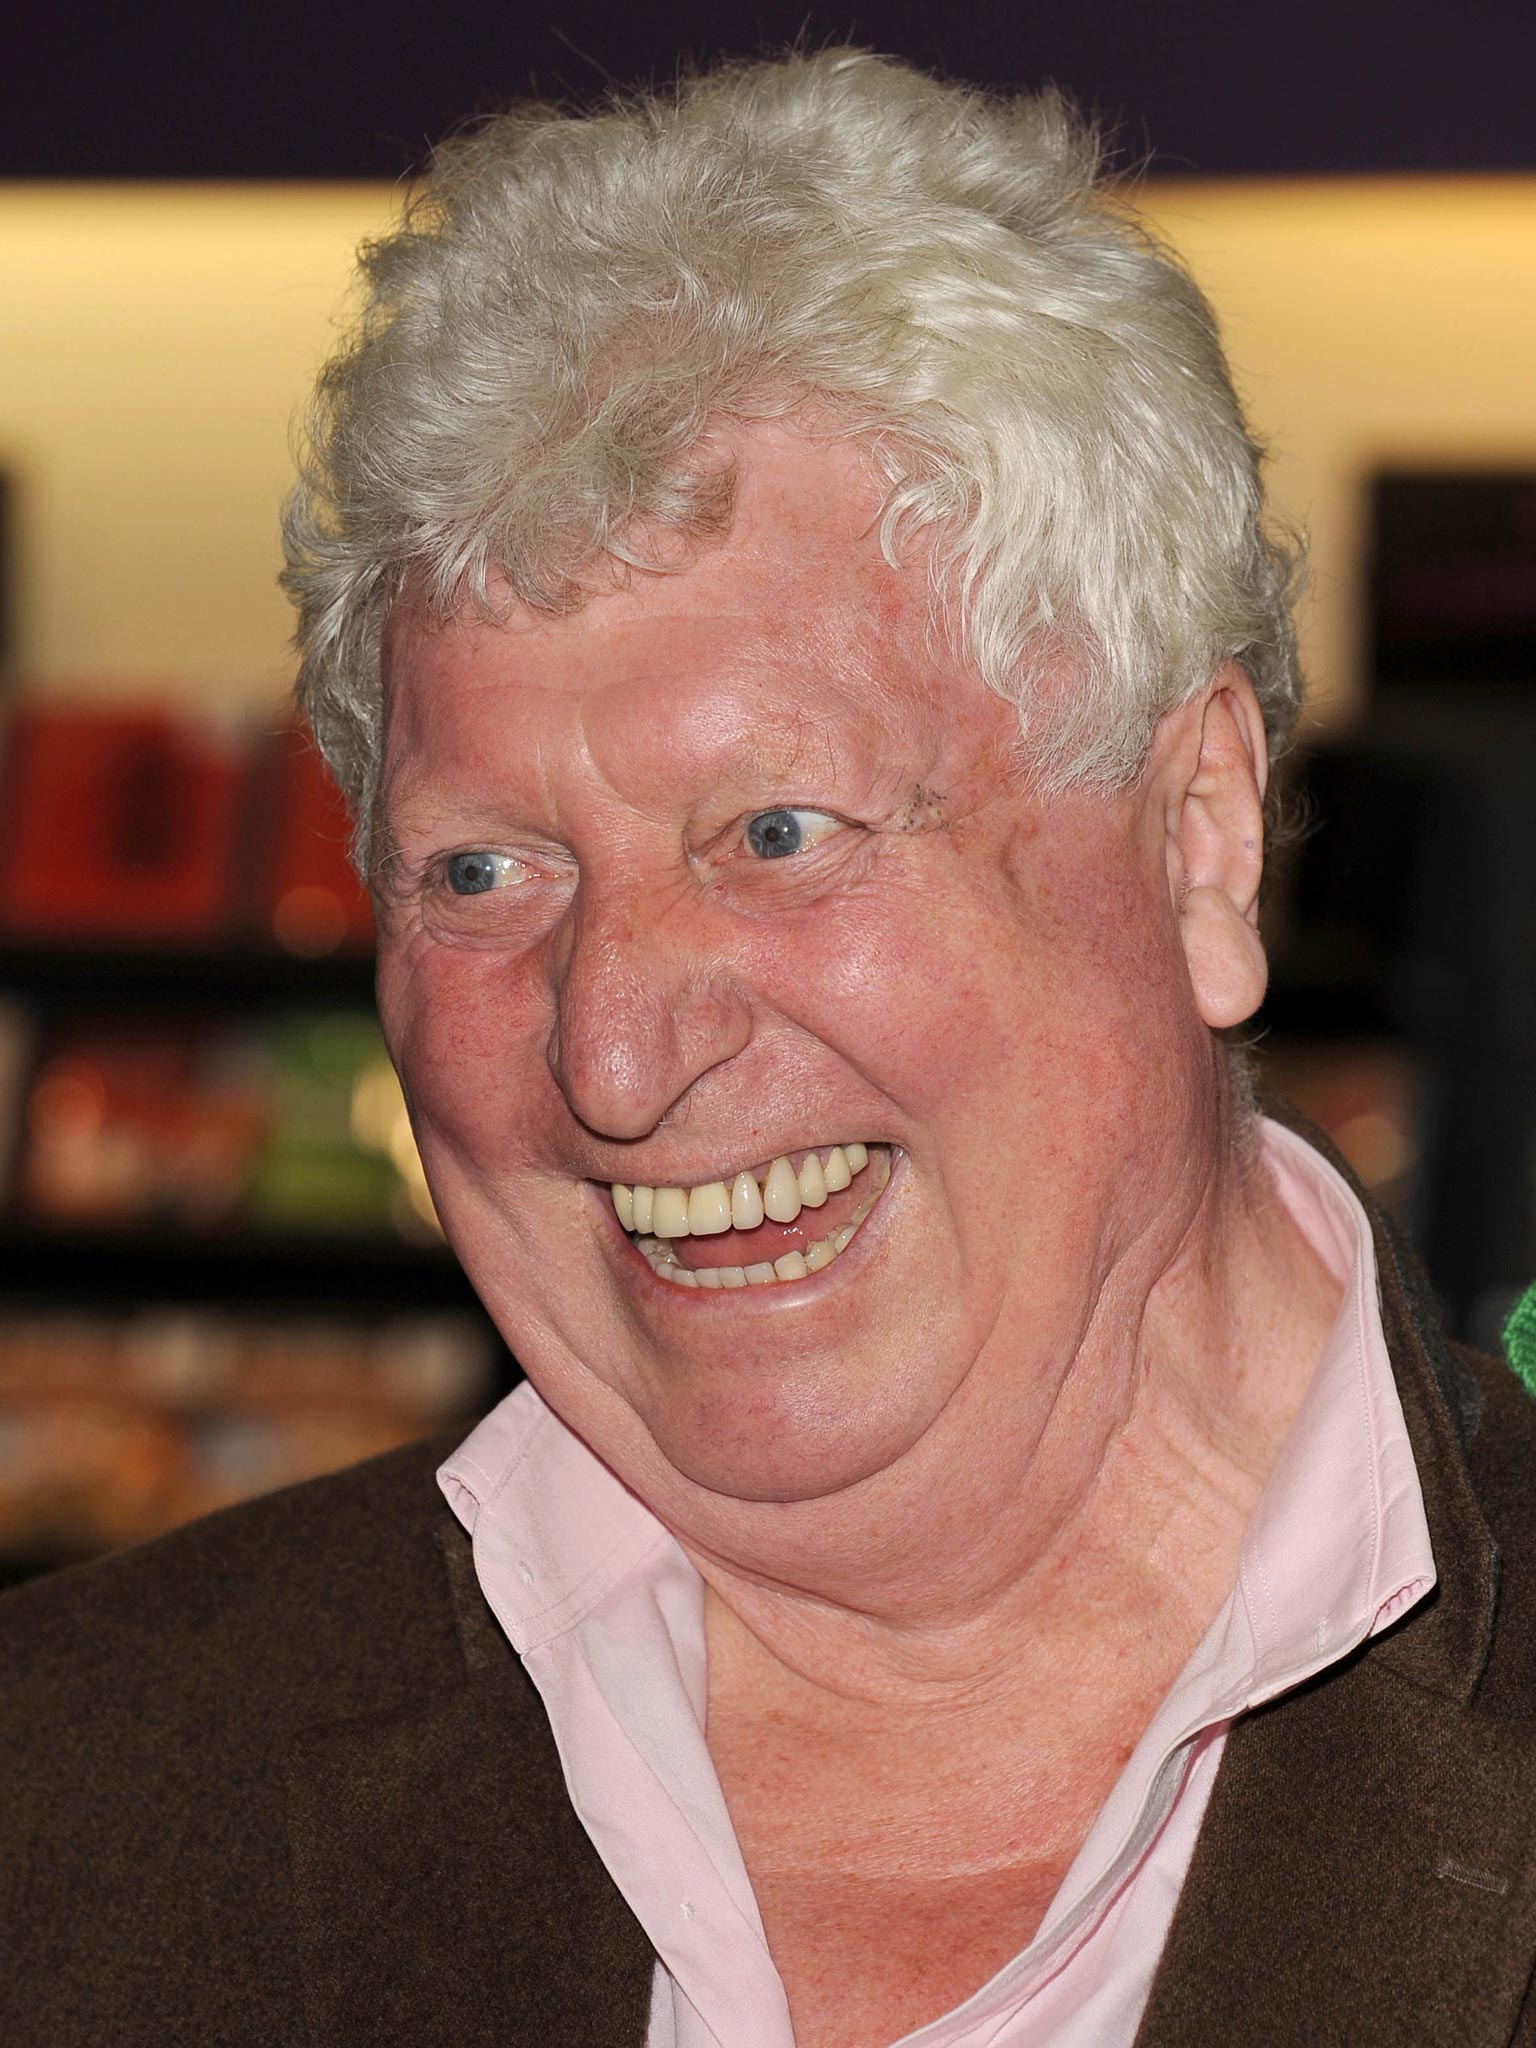 Tom Baker who played the Doctor longer than any other actor